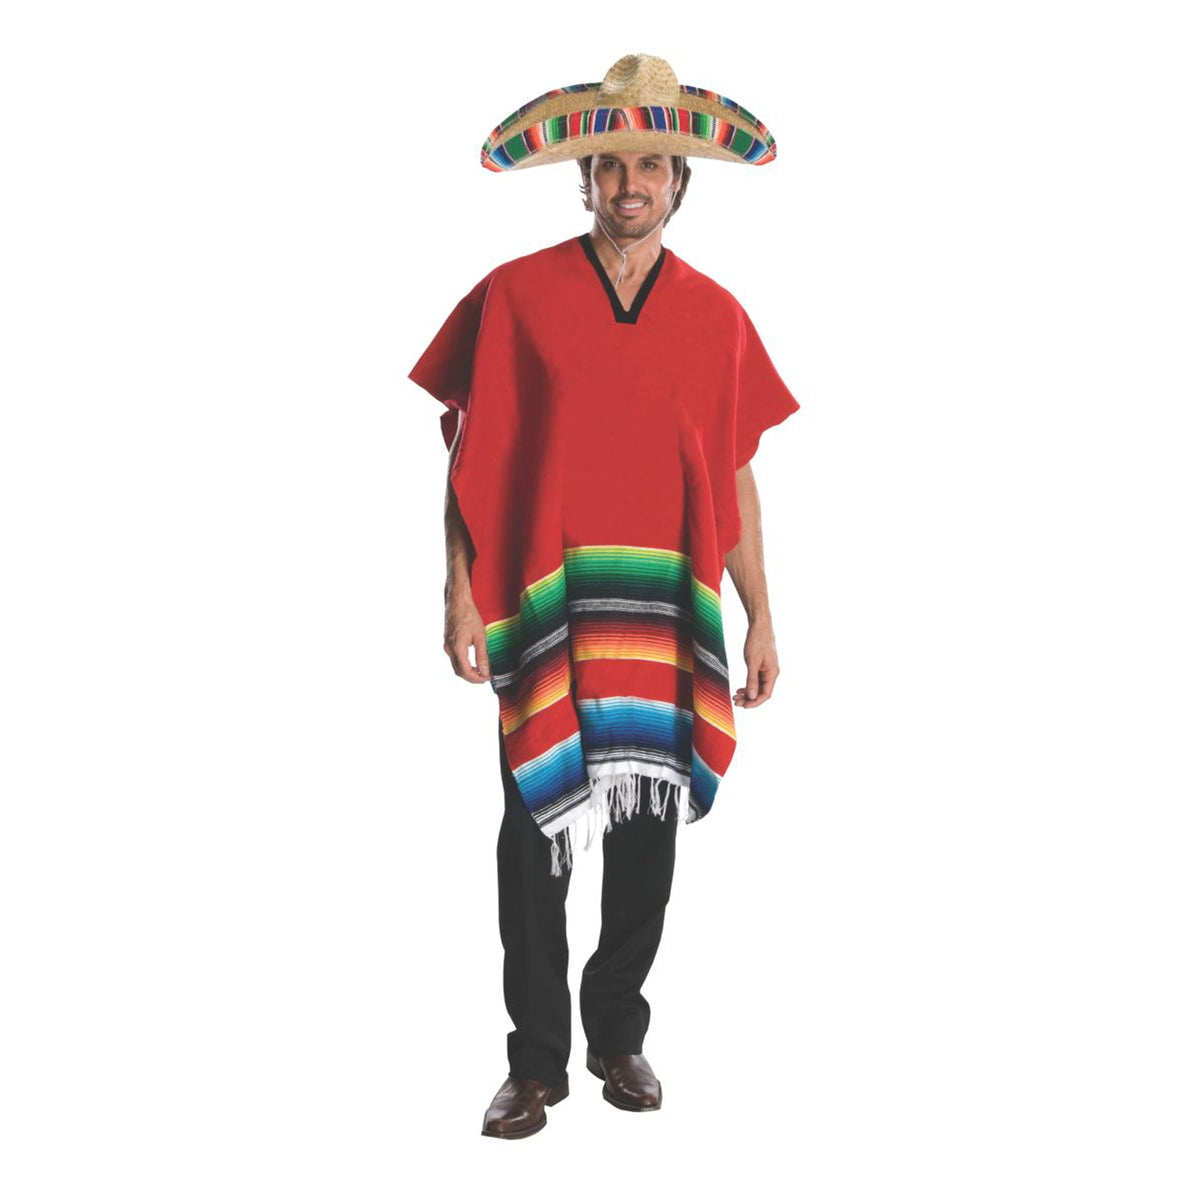 RUBIES II (Ruby Slipper Sales) Costumes Mexican Serape Costume for Adults 883028058006